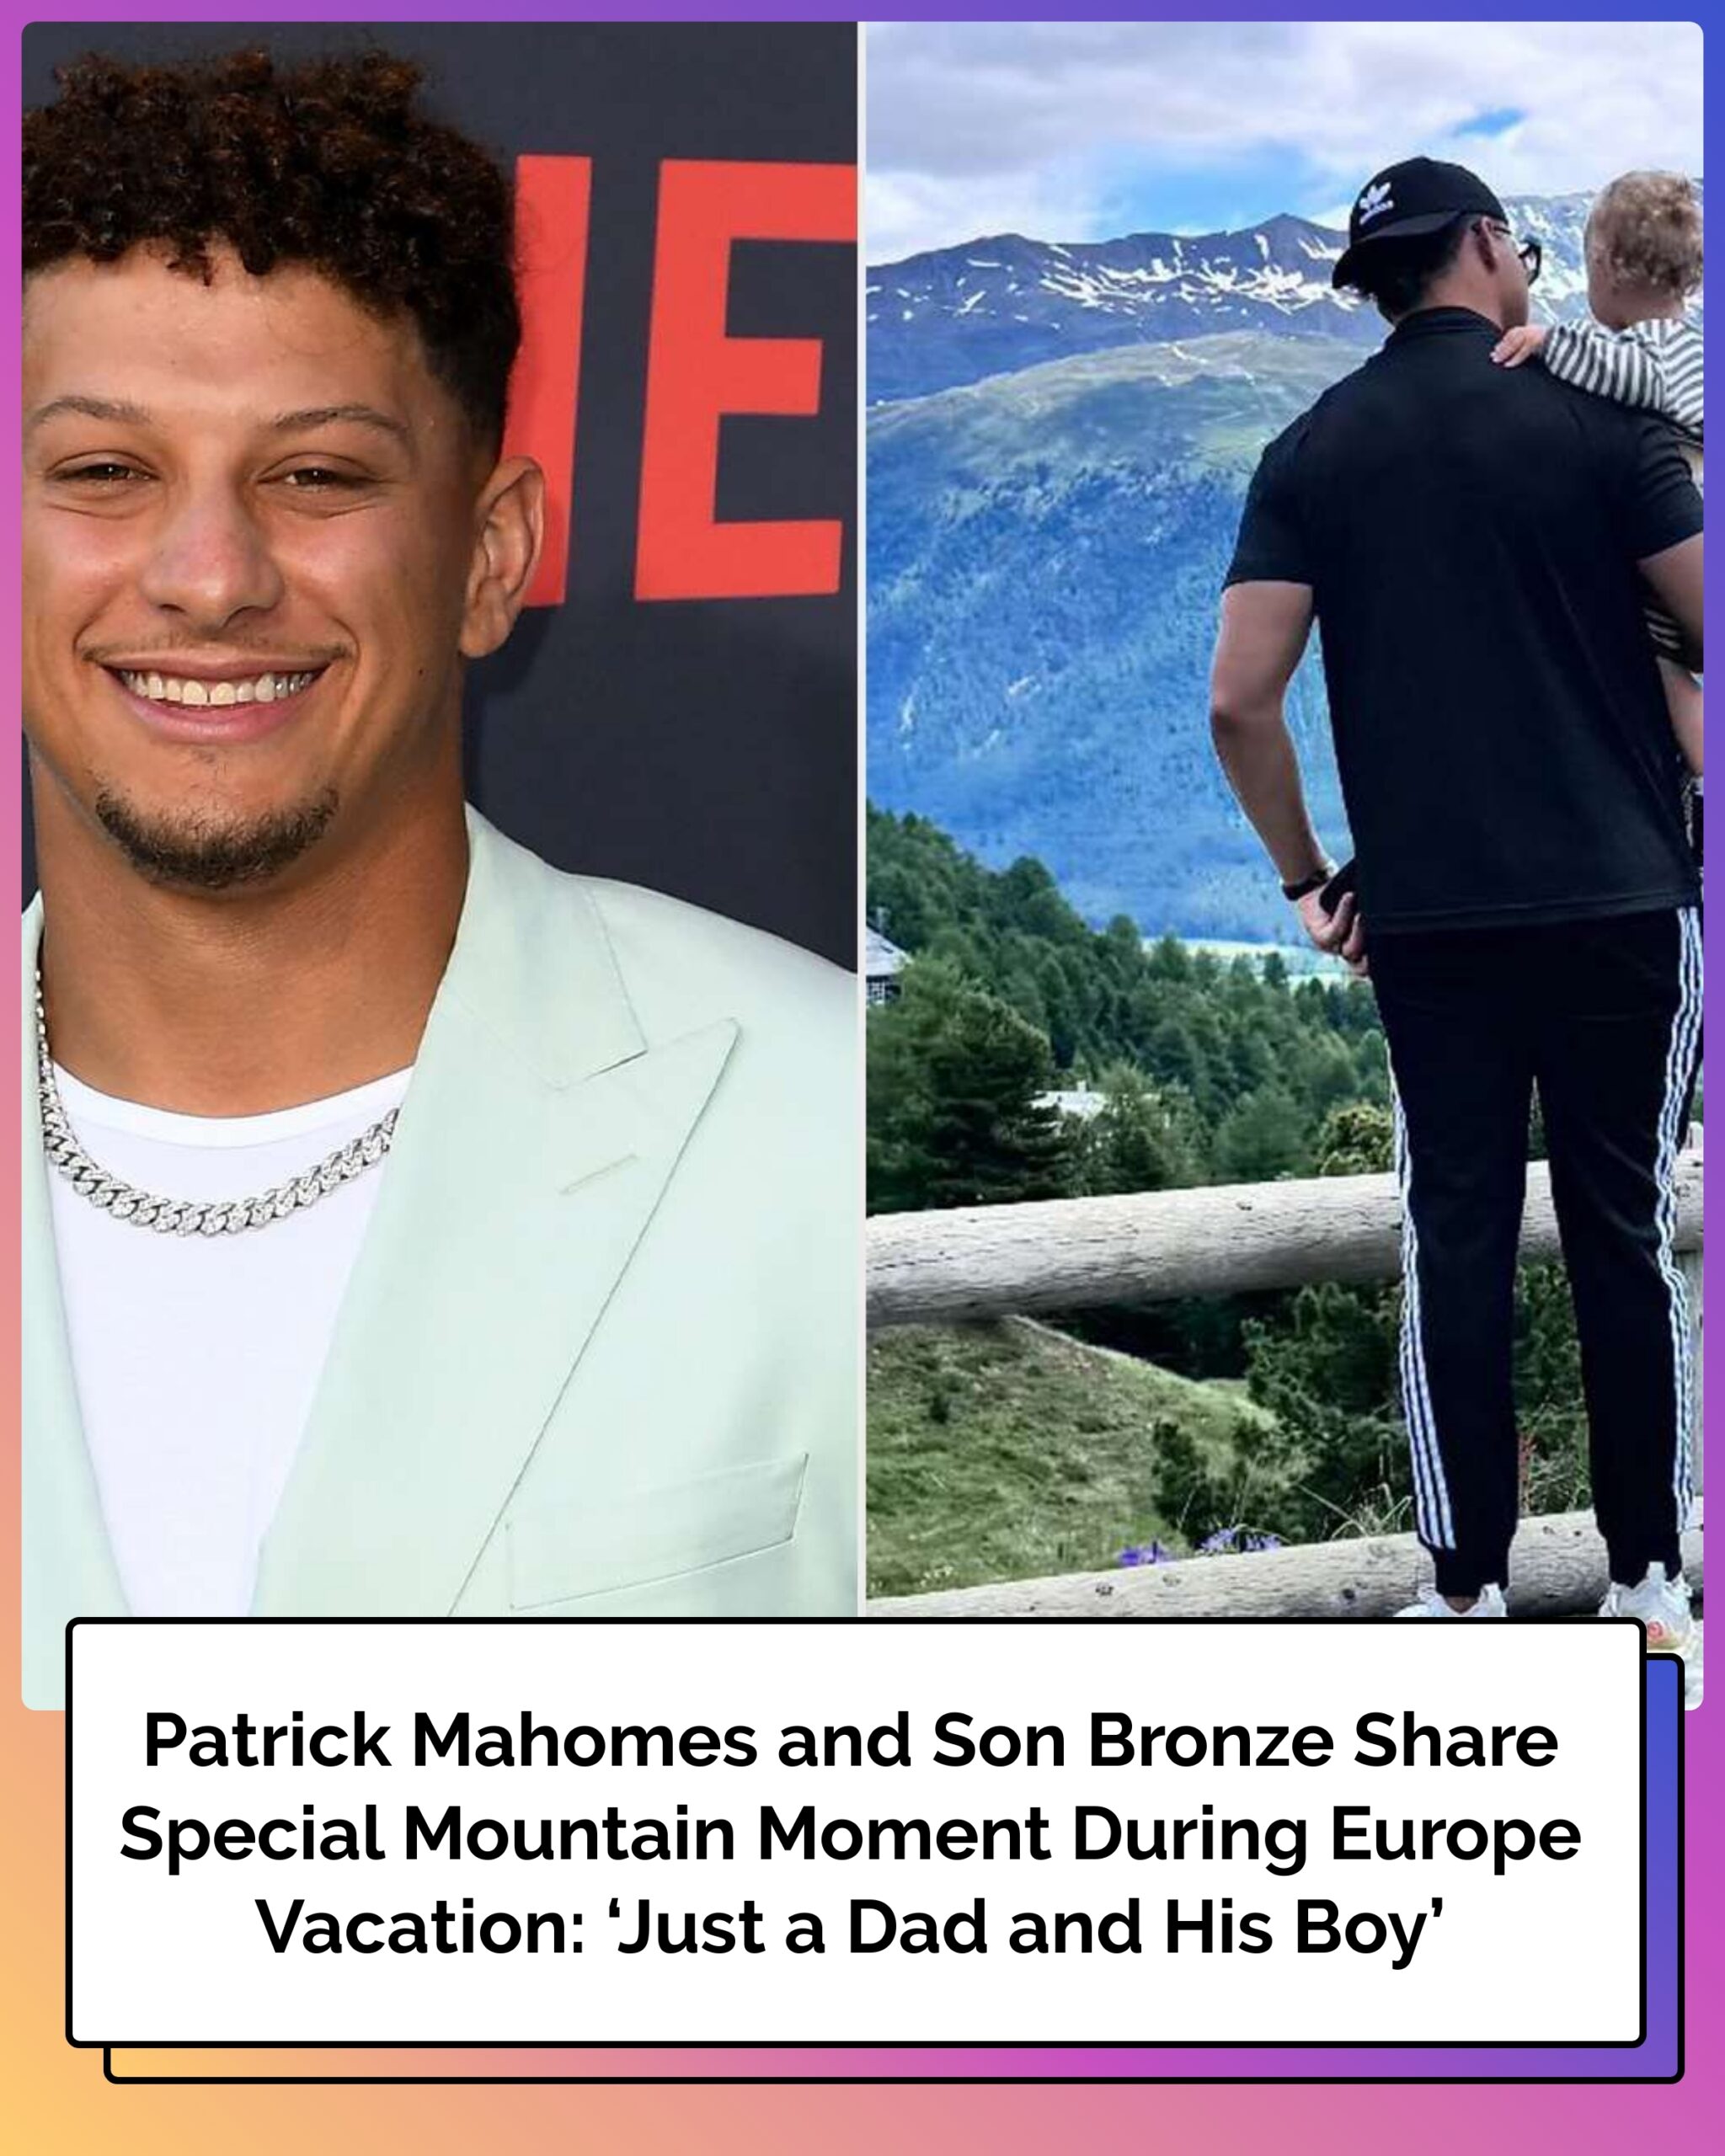 Patrick Mahomes and Son Bronze Share Special Mountain Moment During Europe Vacation: ‘Just a Dad and His Boy’